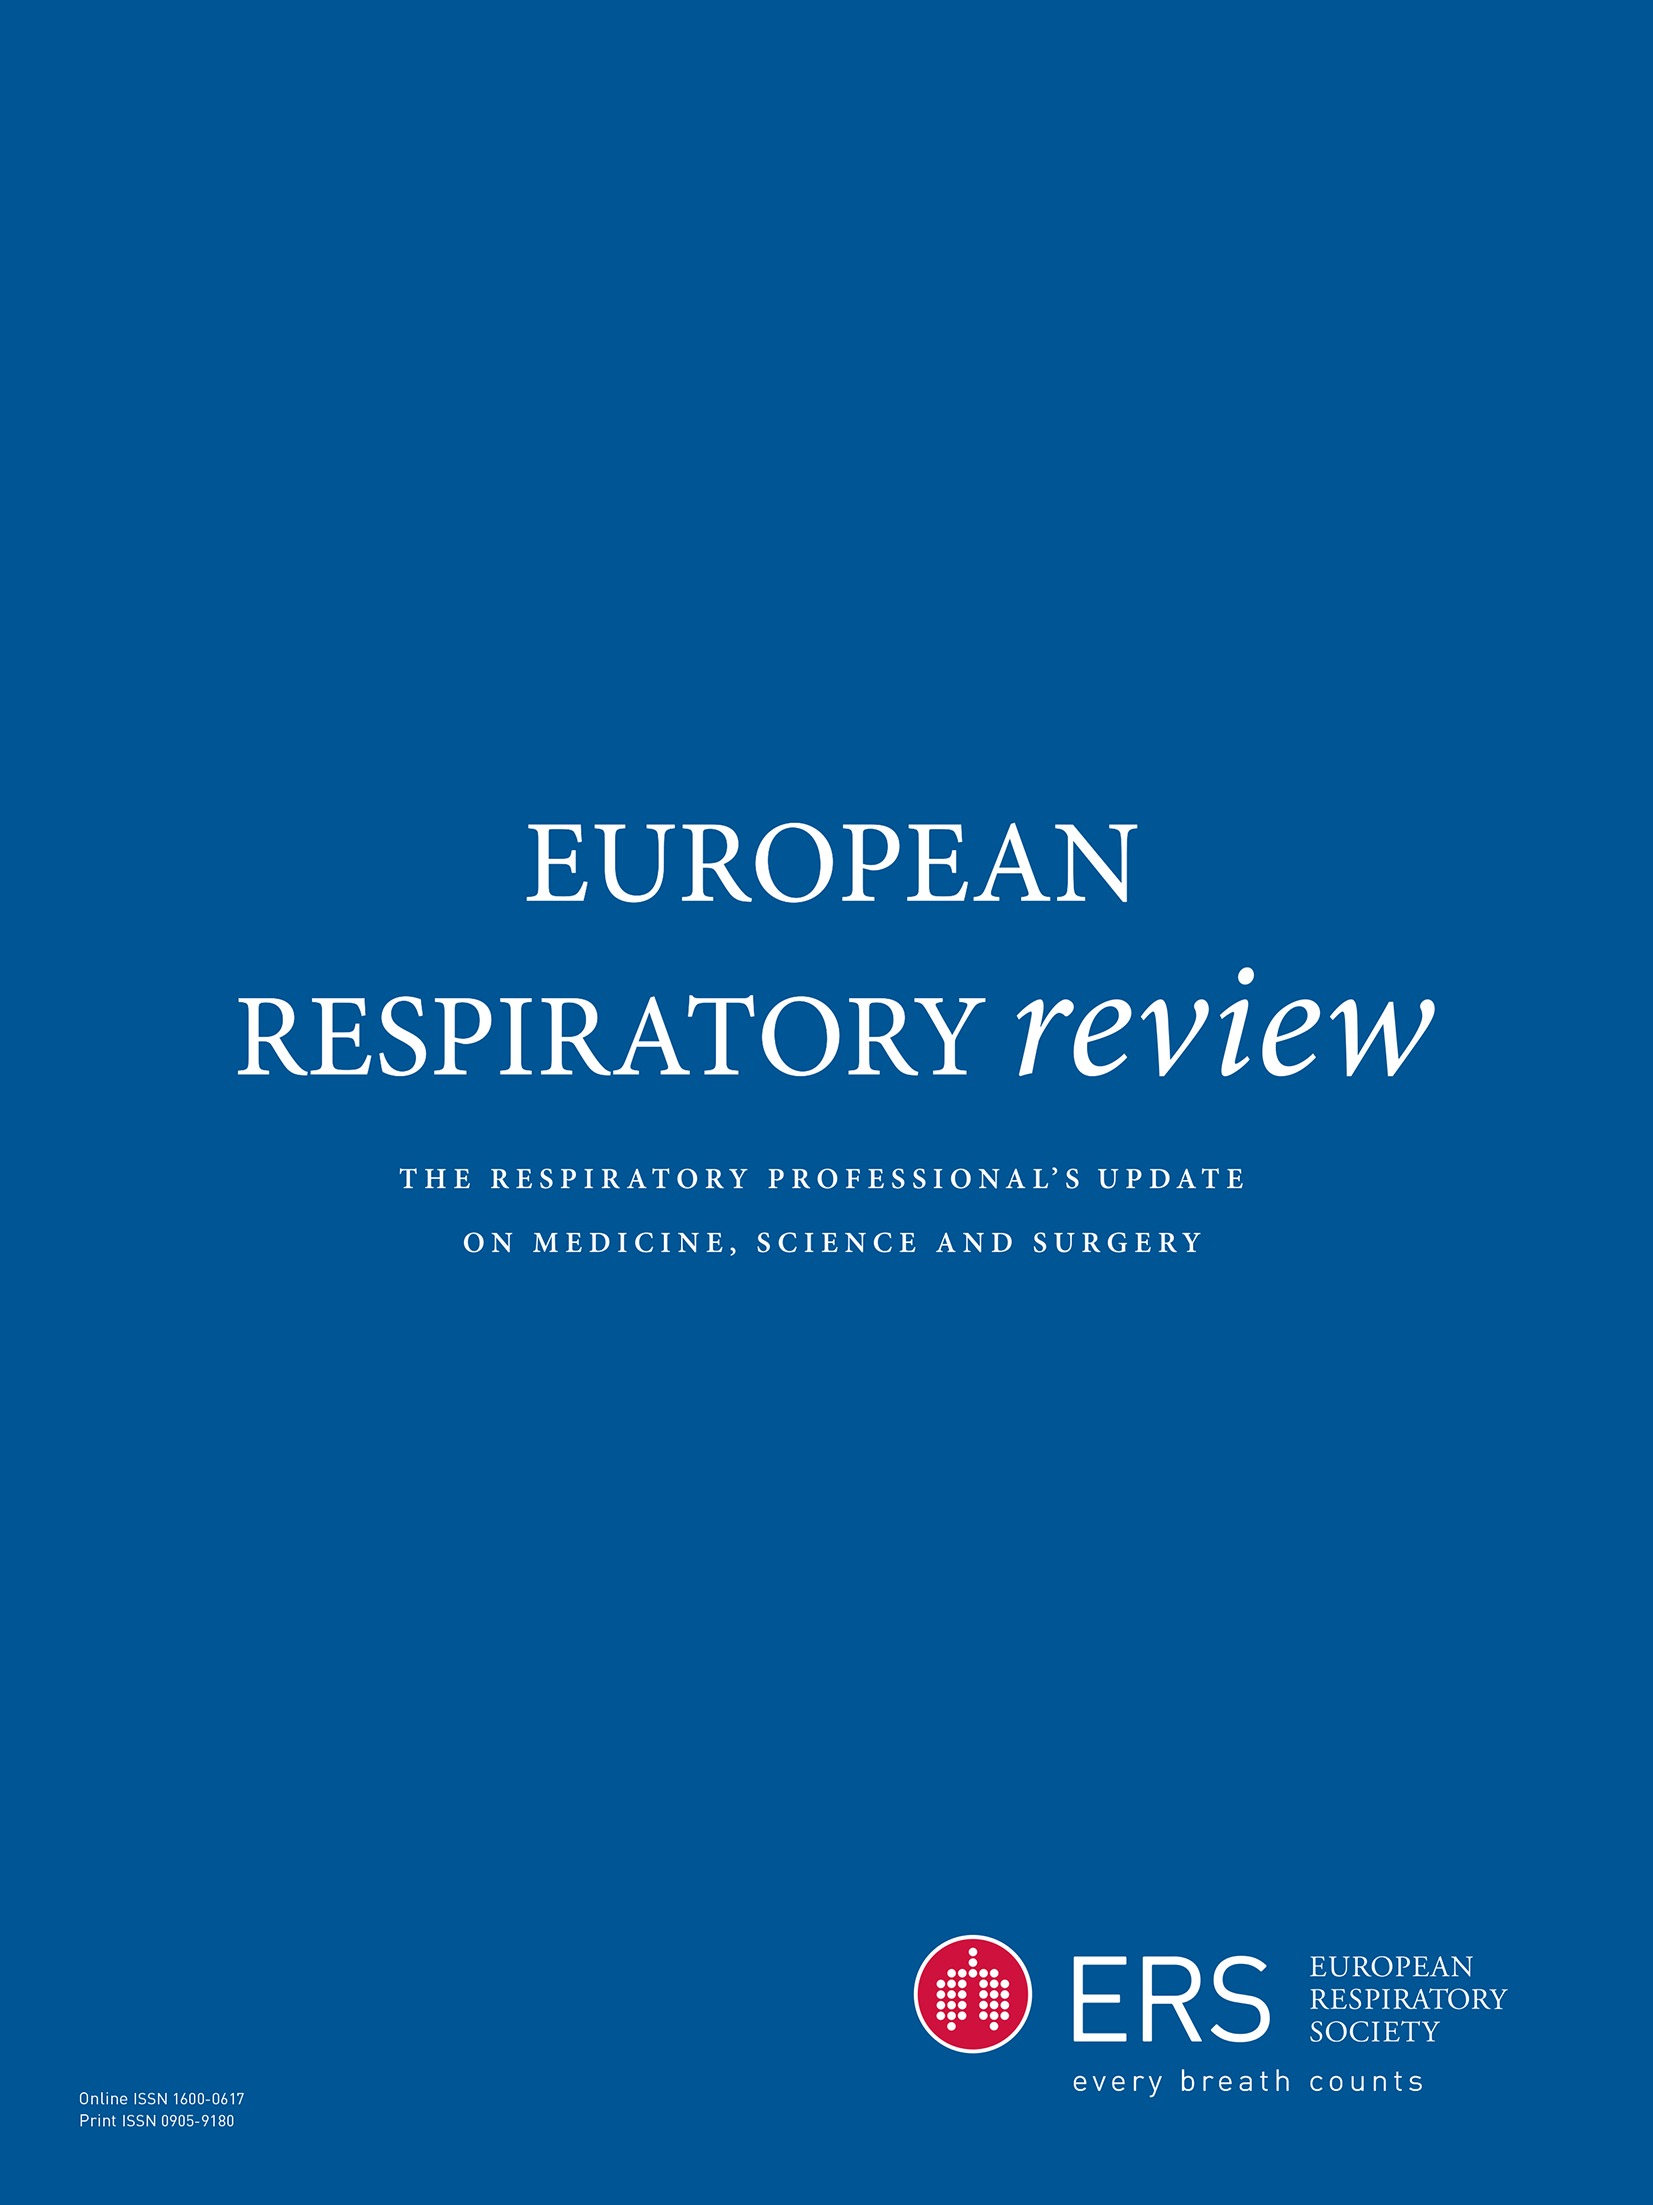 Nebulised granulocyte-macrophage colony-stimulating factor (GM-CSF) in autoimmune pulmonary alveolar proteinosis: a systematic review and meta-analysis